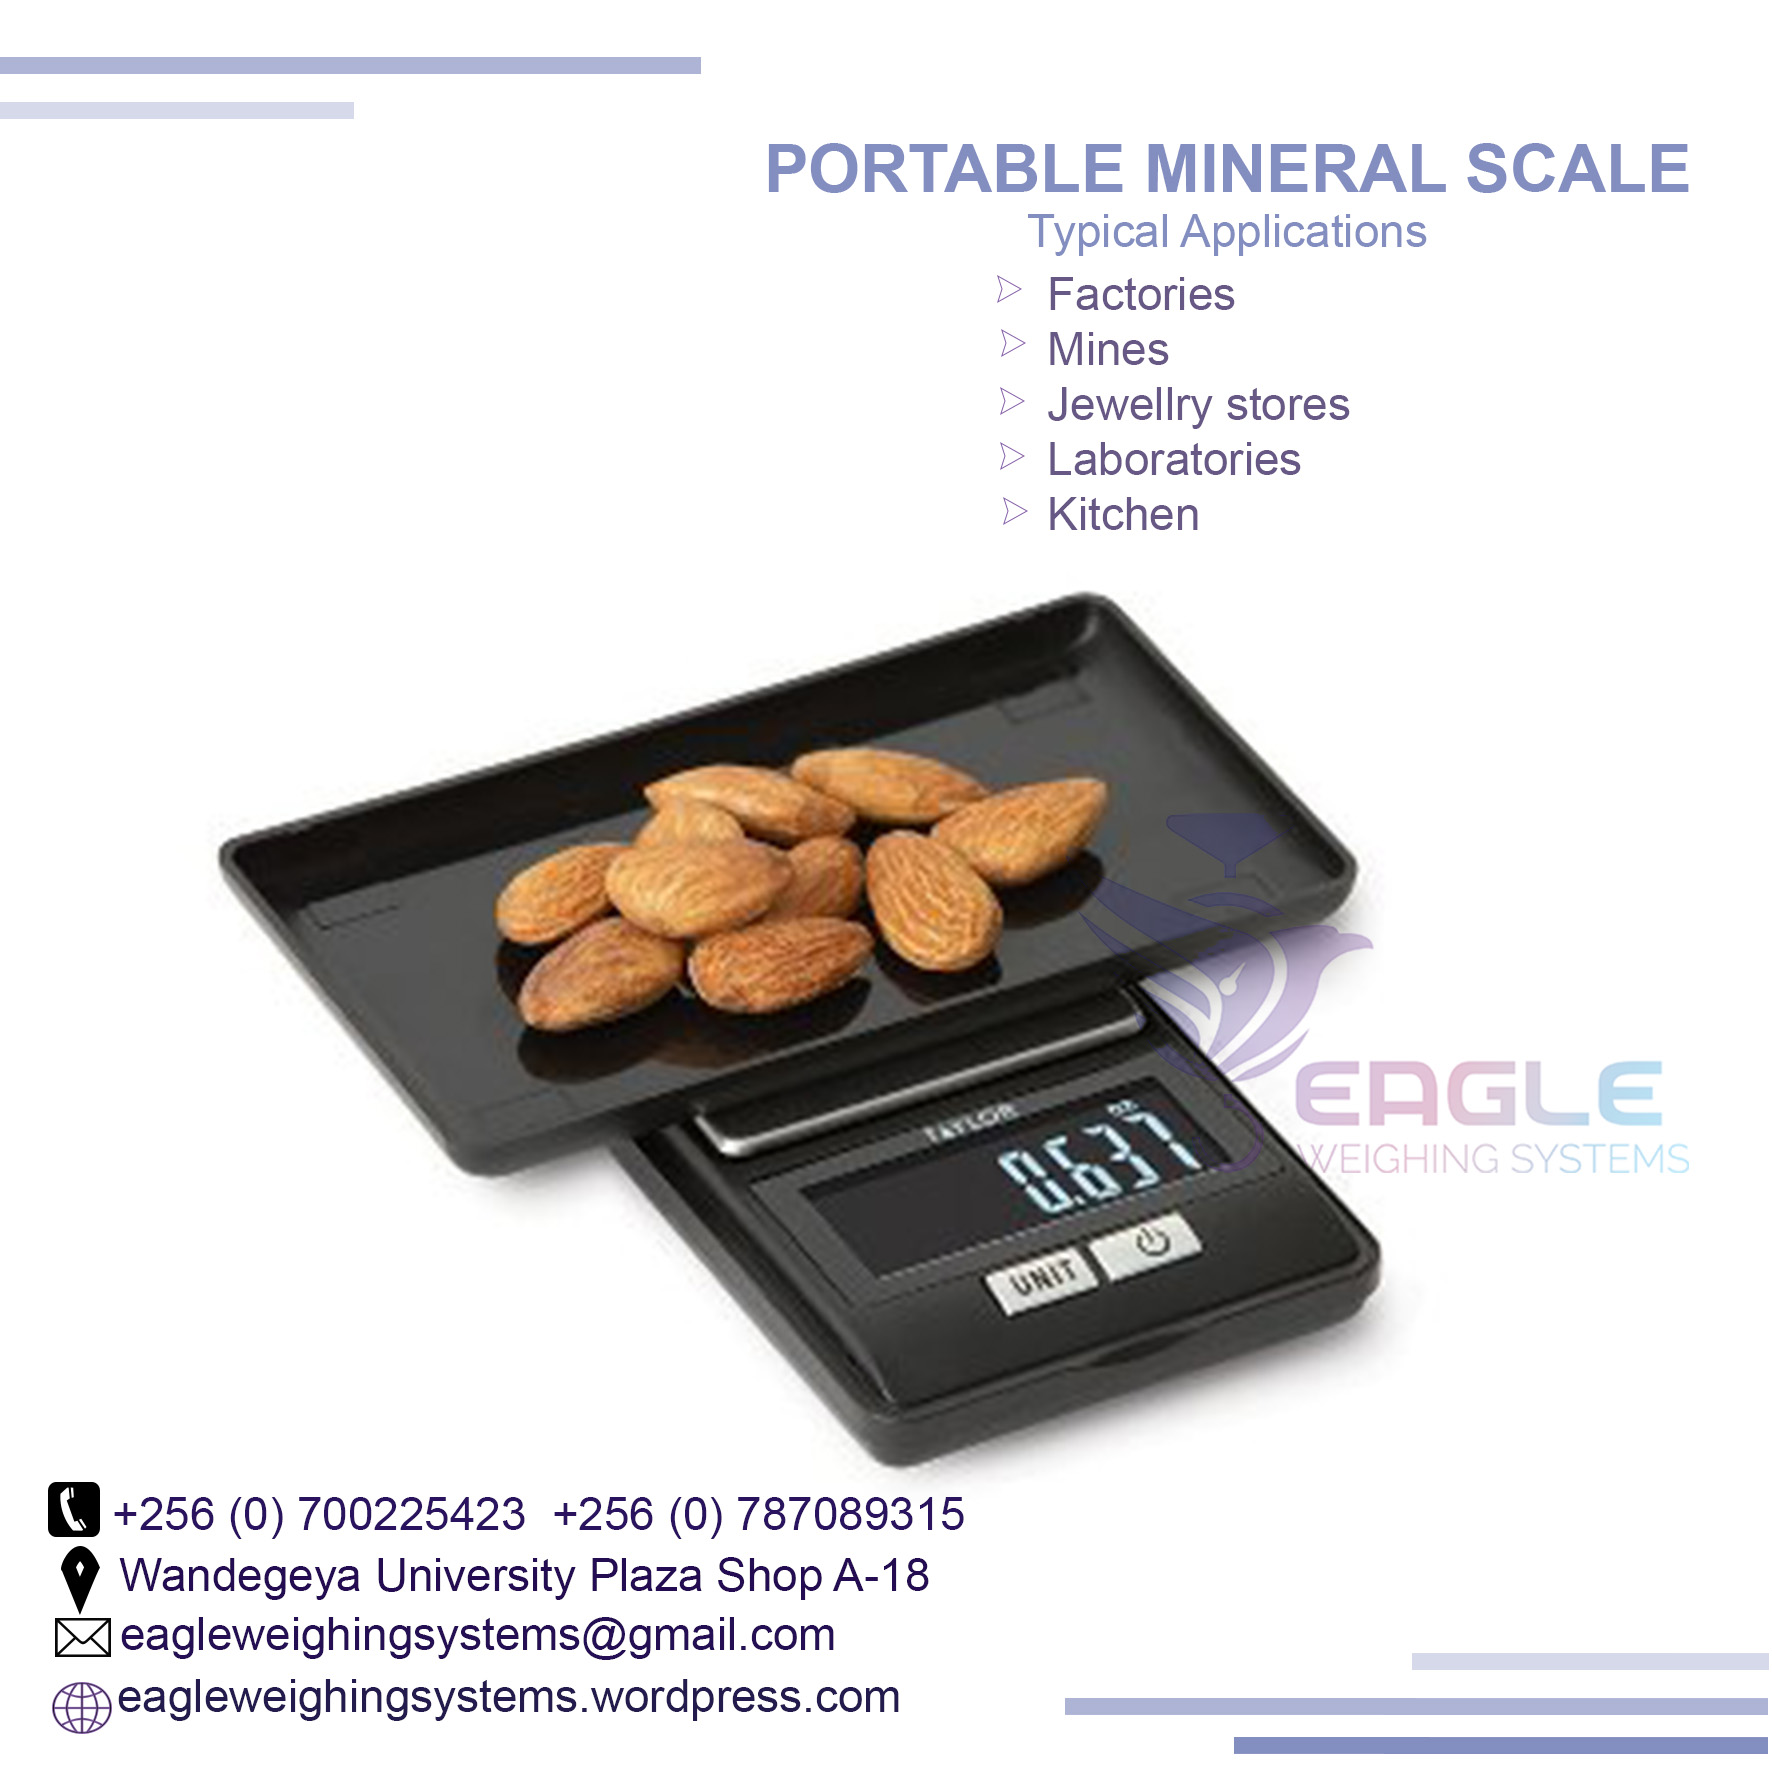 Portable mineral, jewelry commercial table top weighing scale Kampala, Kampala Central Division, Central, Uganda